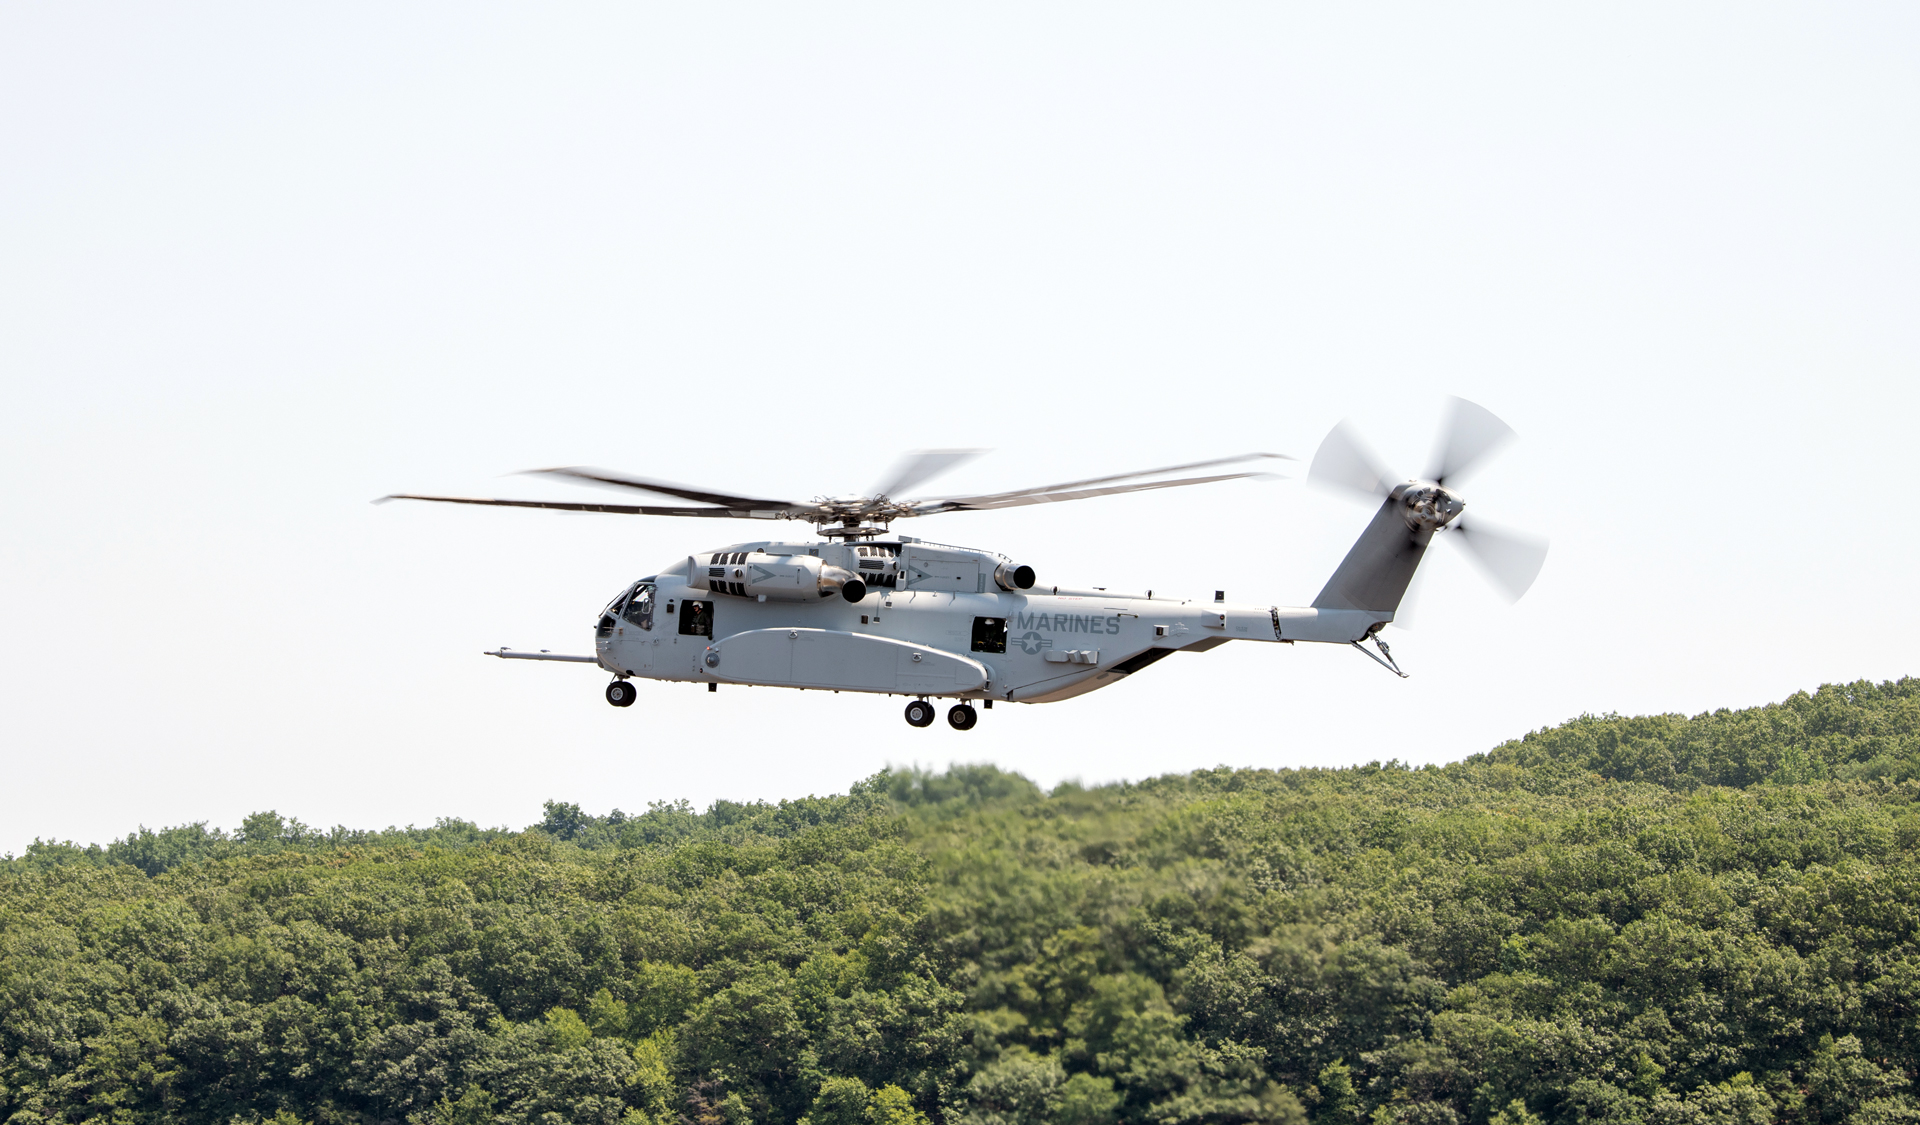 U.S. Marines conduct a CH-53K test flight at Sikorsky in Stratford, Conn. The heavy lift helicopter will be based at Marine Corps Air Station New River in Jacksonville, North Carolina.  Photo courtesy of Sikorsky, a Lockheed Martin company.